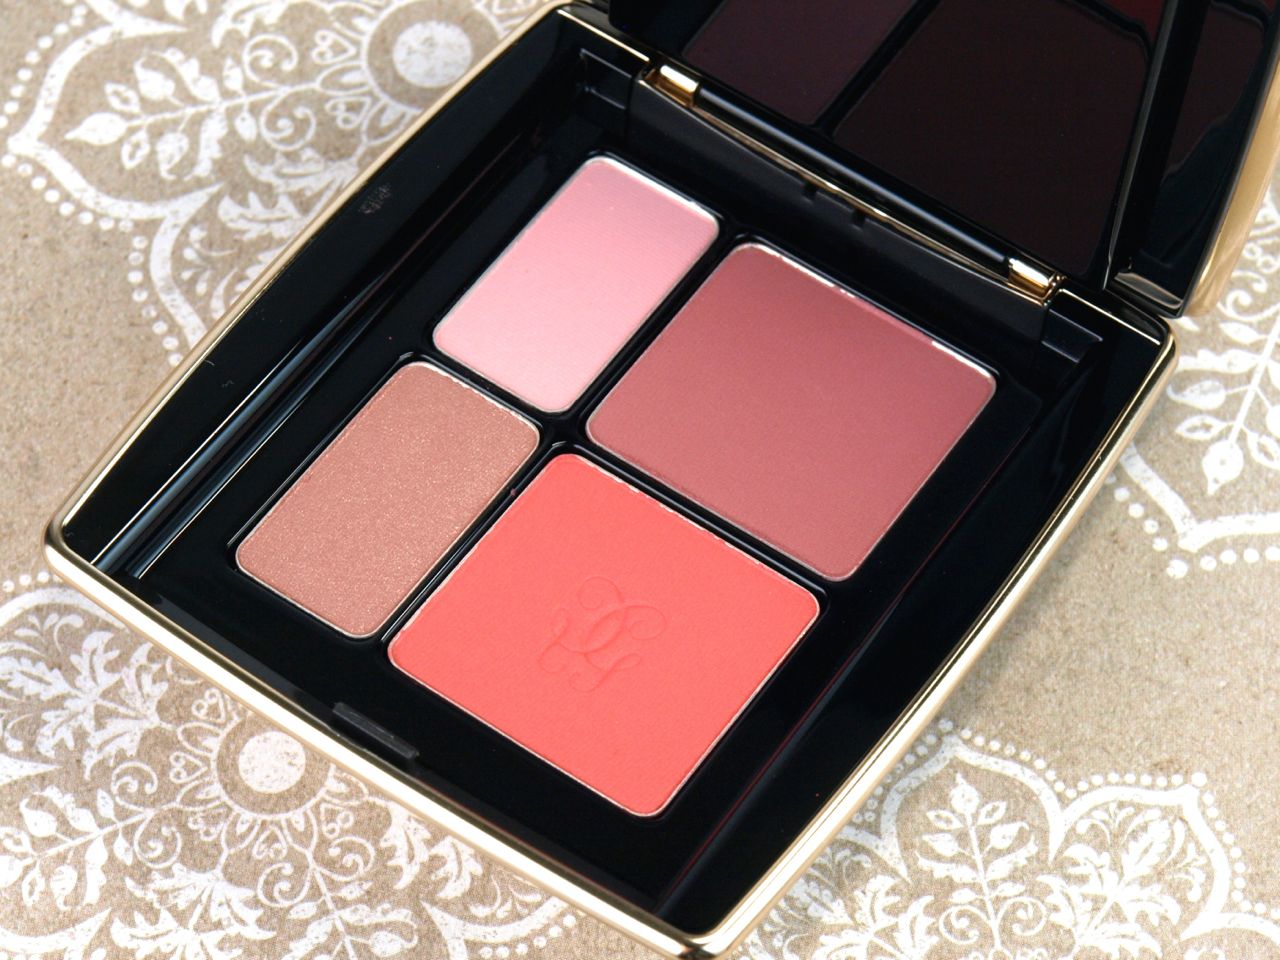 Guerlain Christmas Color Collection 2014: Review and Swatches